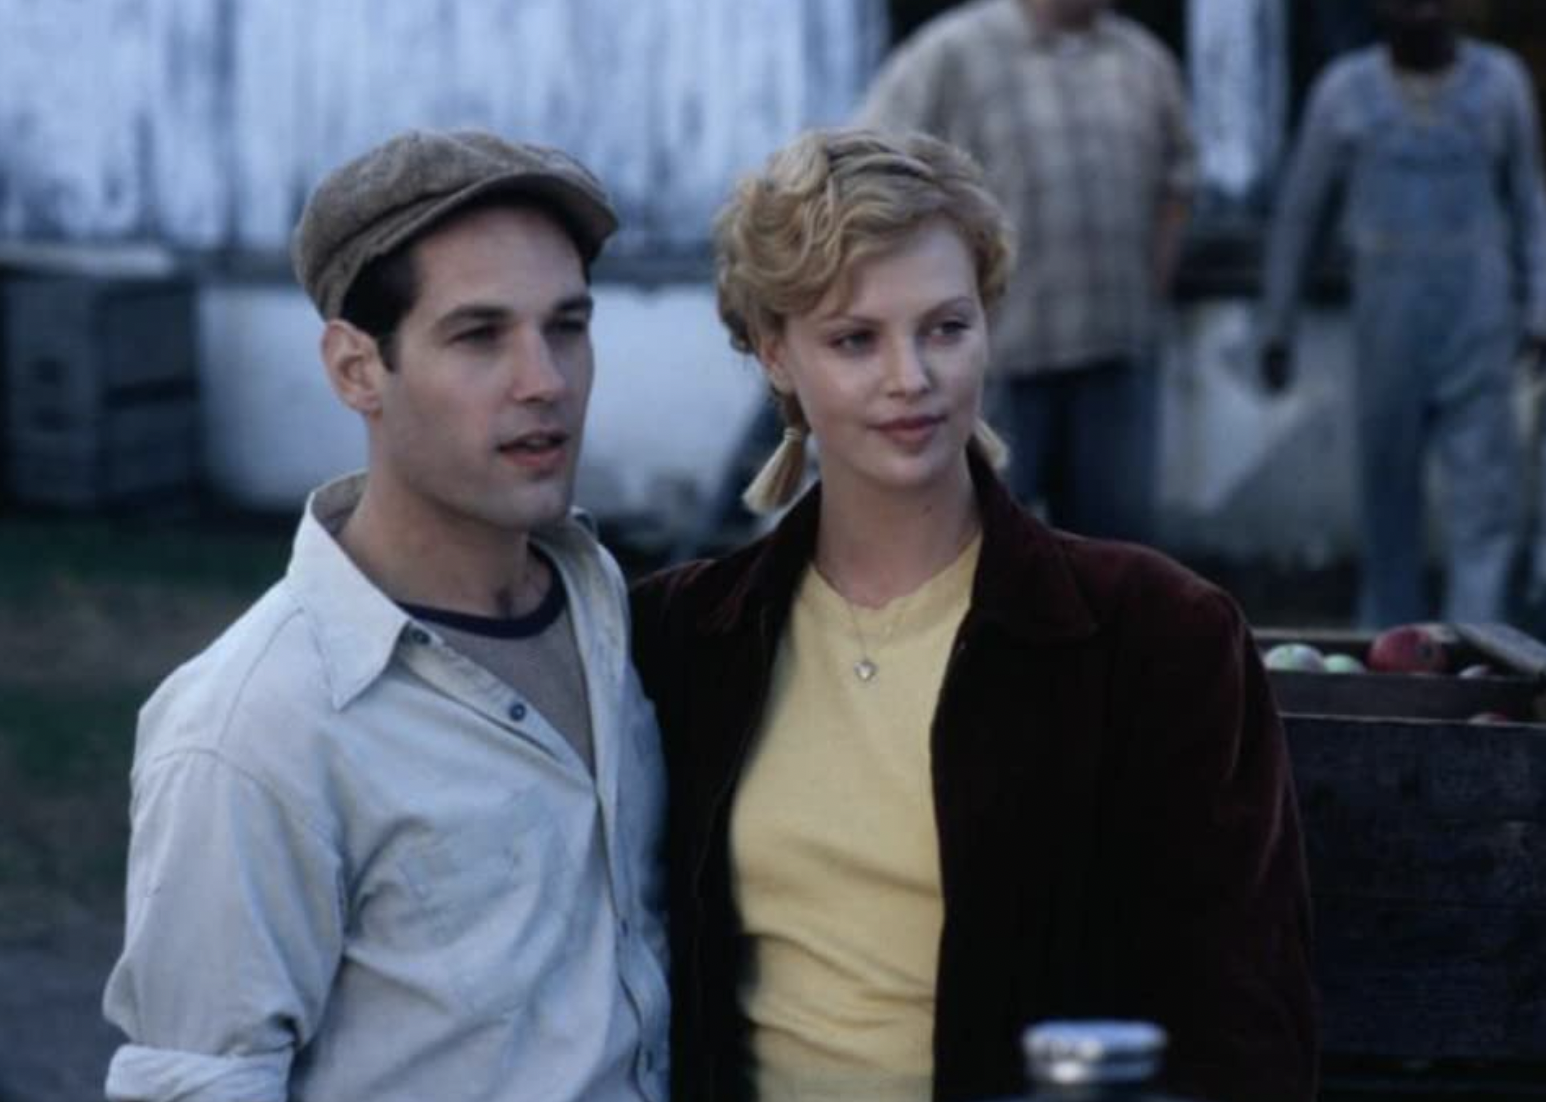 Charlize Theron and Paul Rudd in "The Cider House Rules"